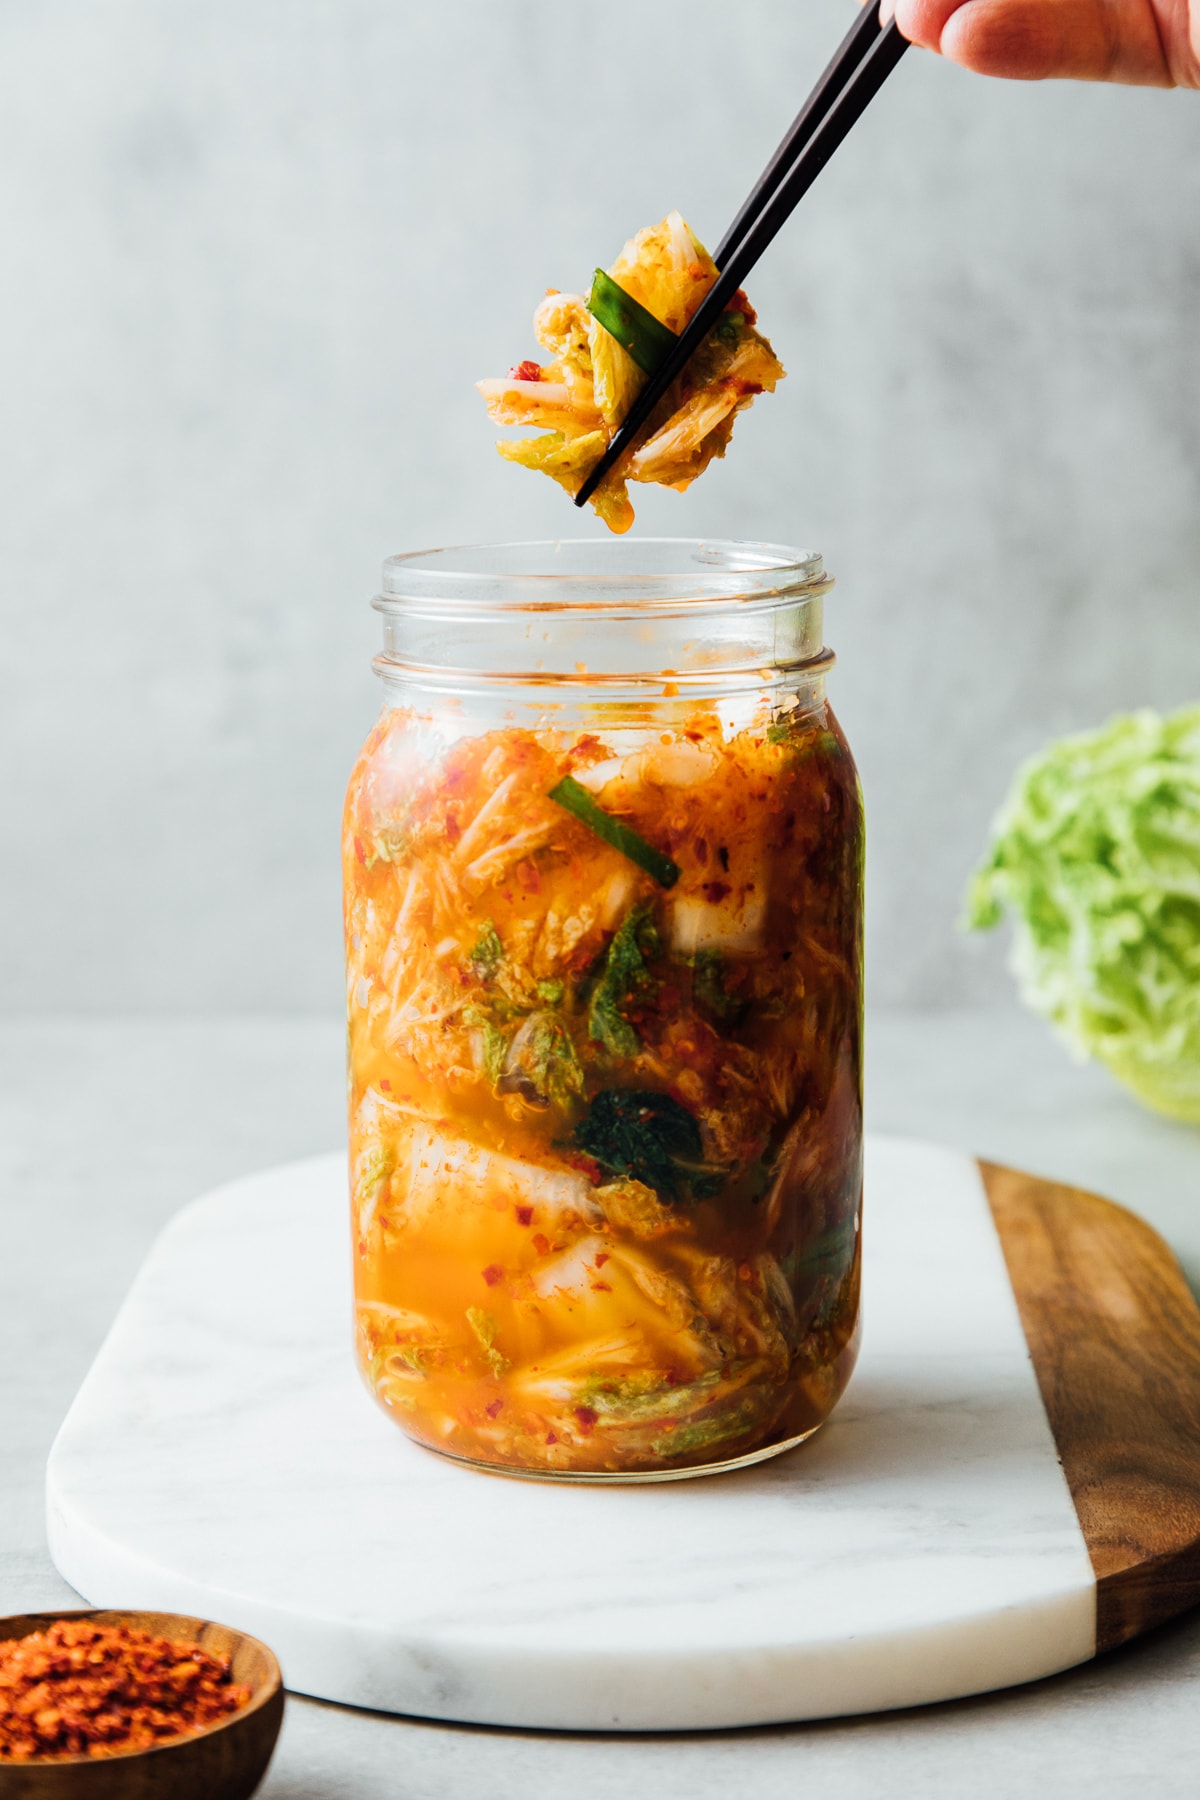 Recipes for homemade fermented pickles and kimchi